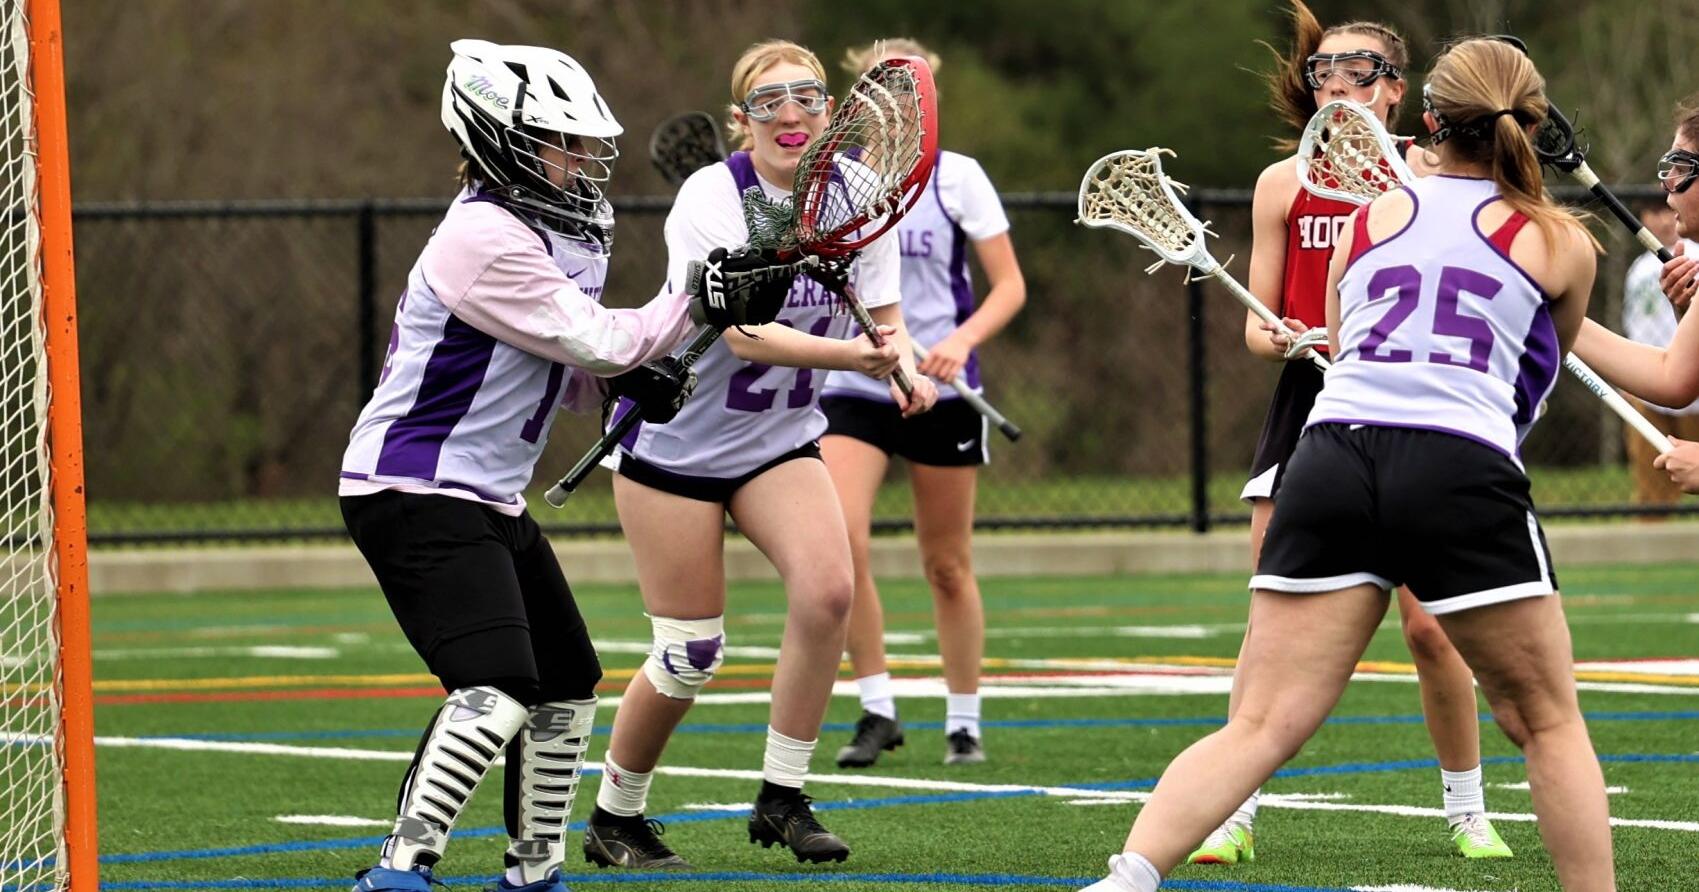 Lacrosse: Pittsfield girls win at Springfield; Wahconah victorious on Senior Night